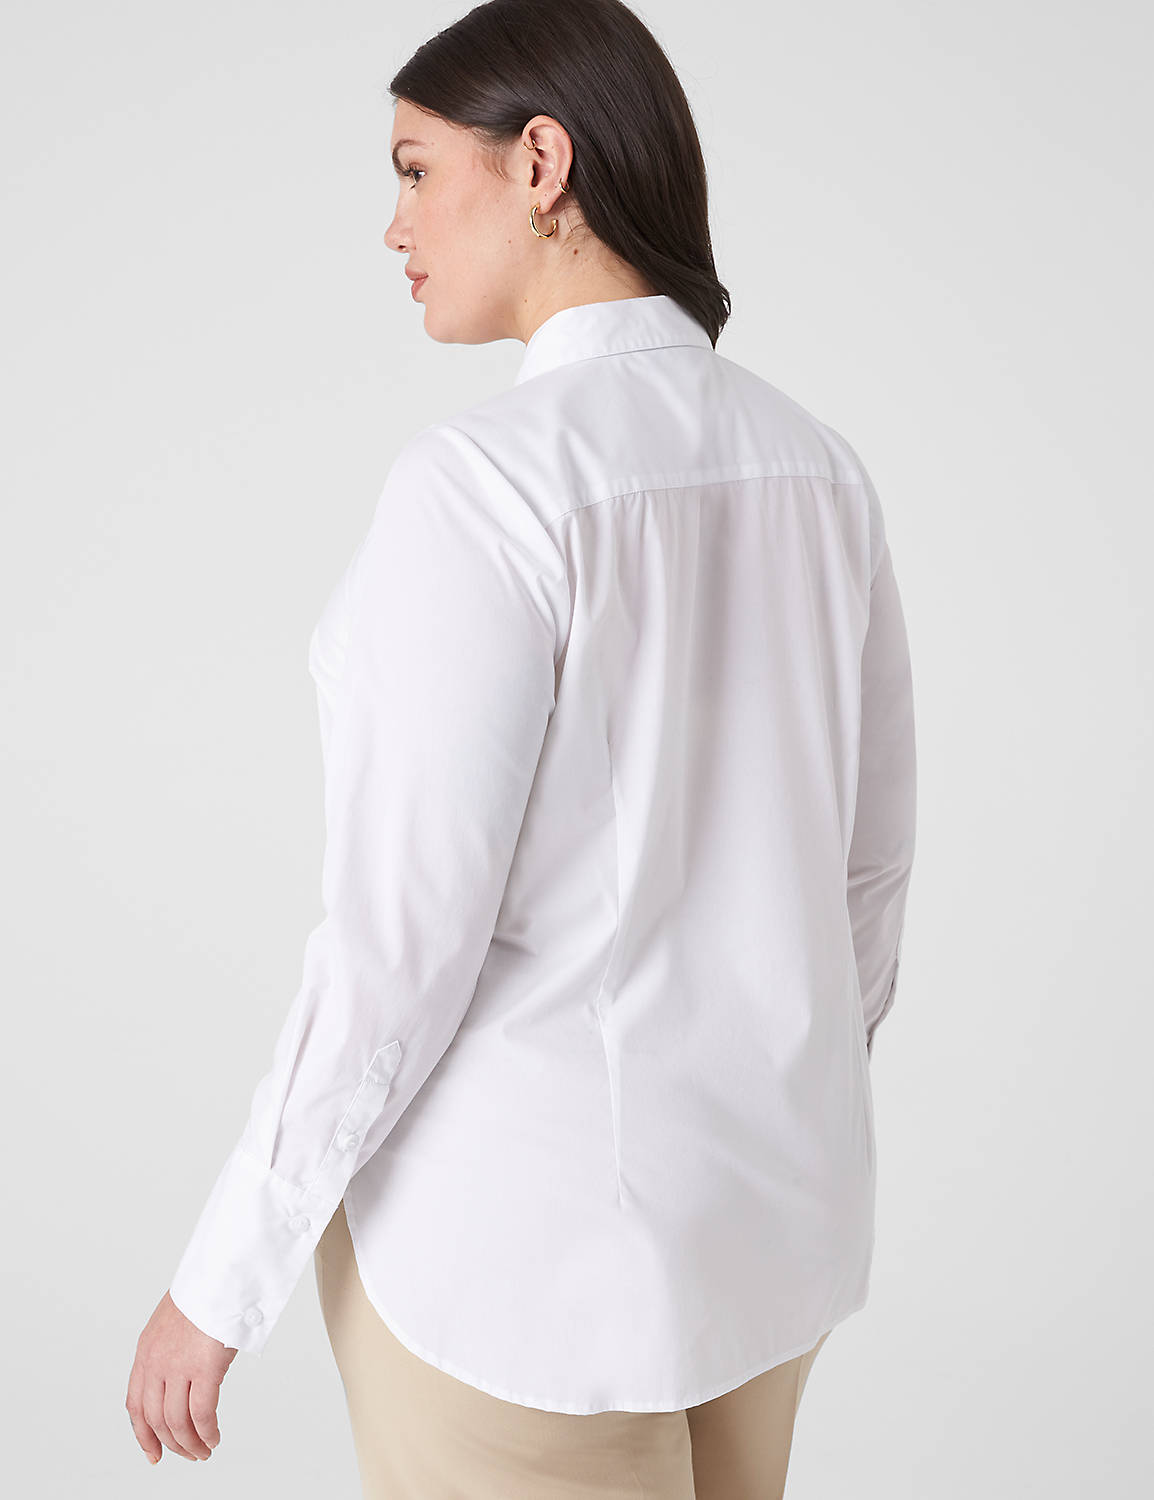 Classic Long Sleeve Button Down Gir Product Image 2